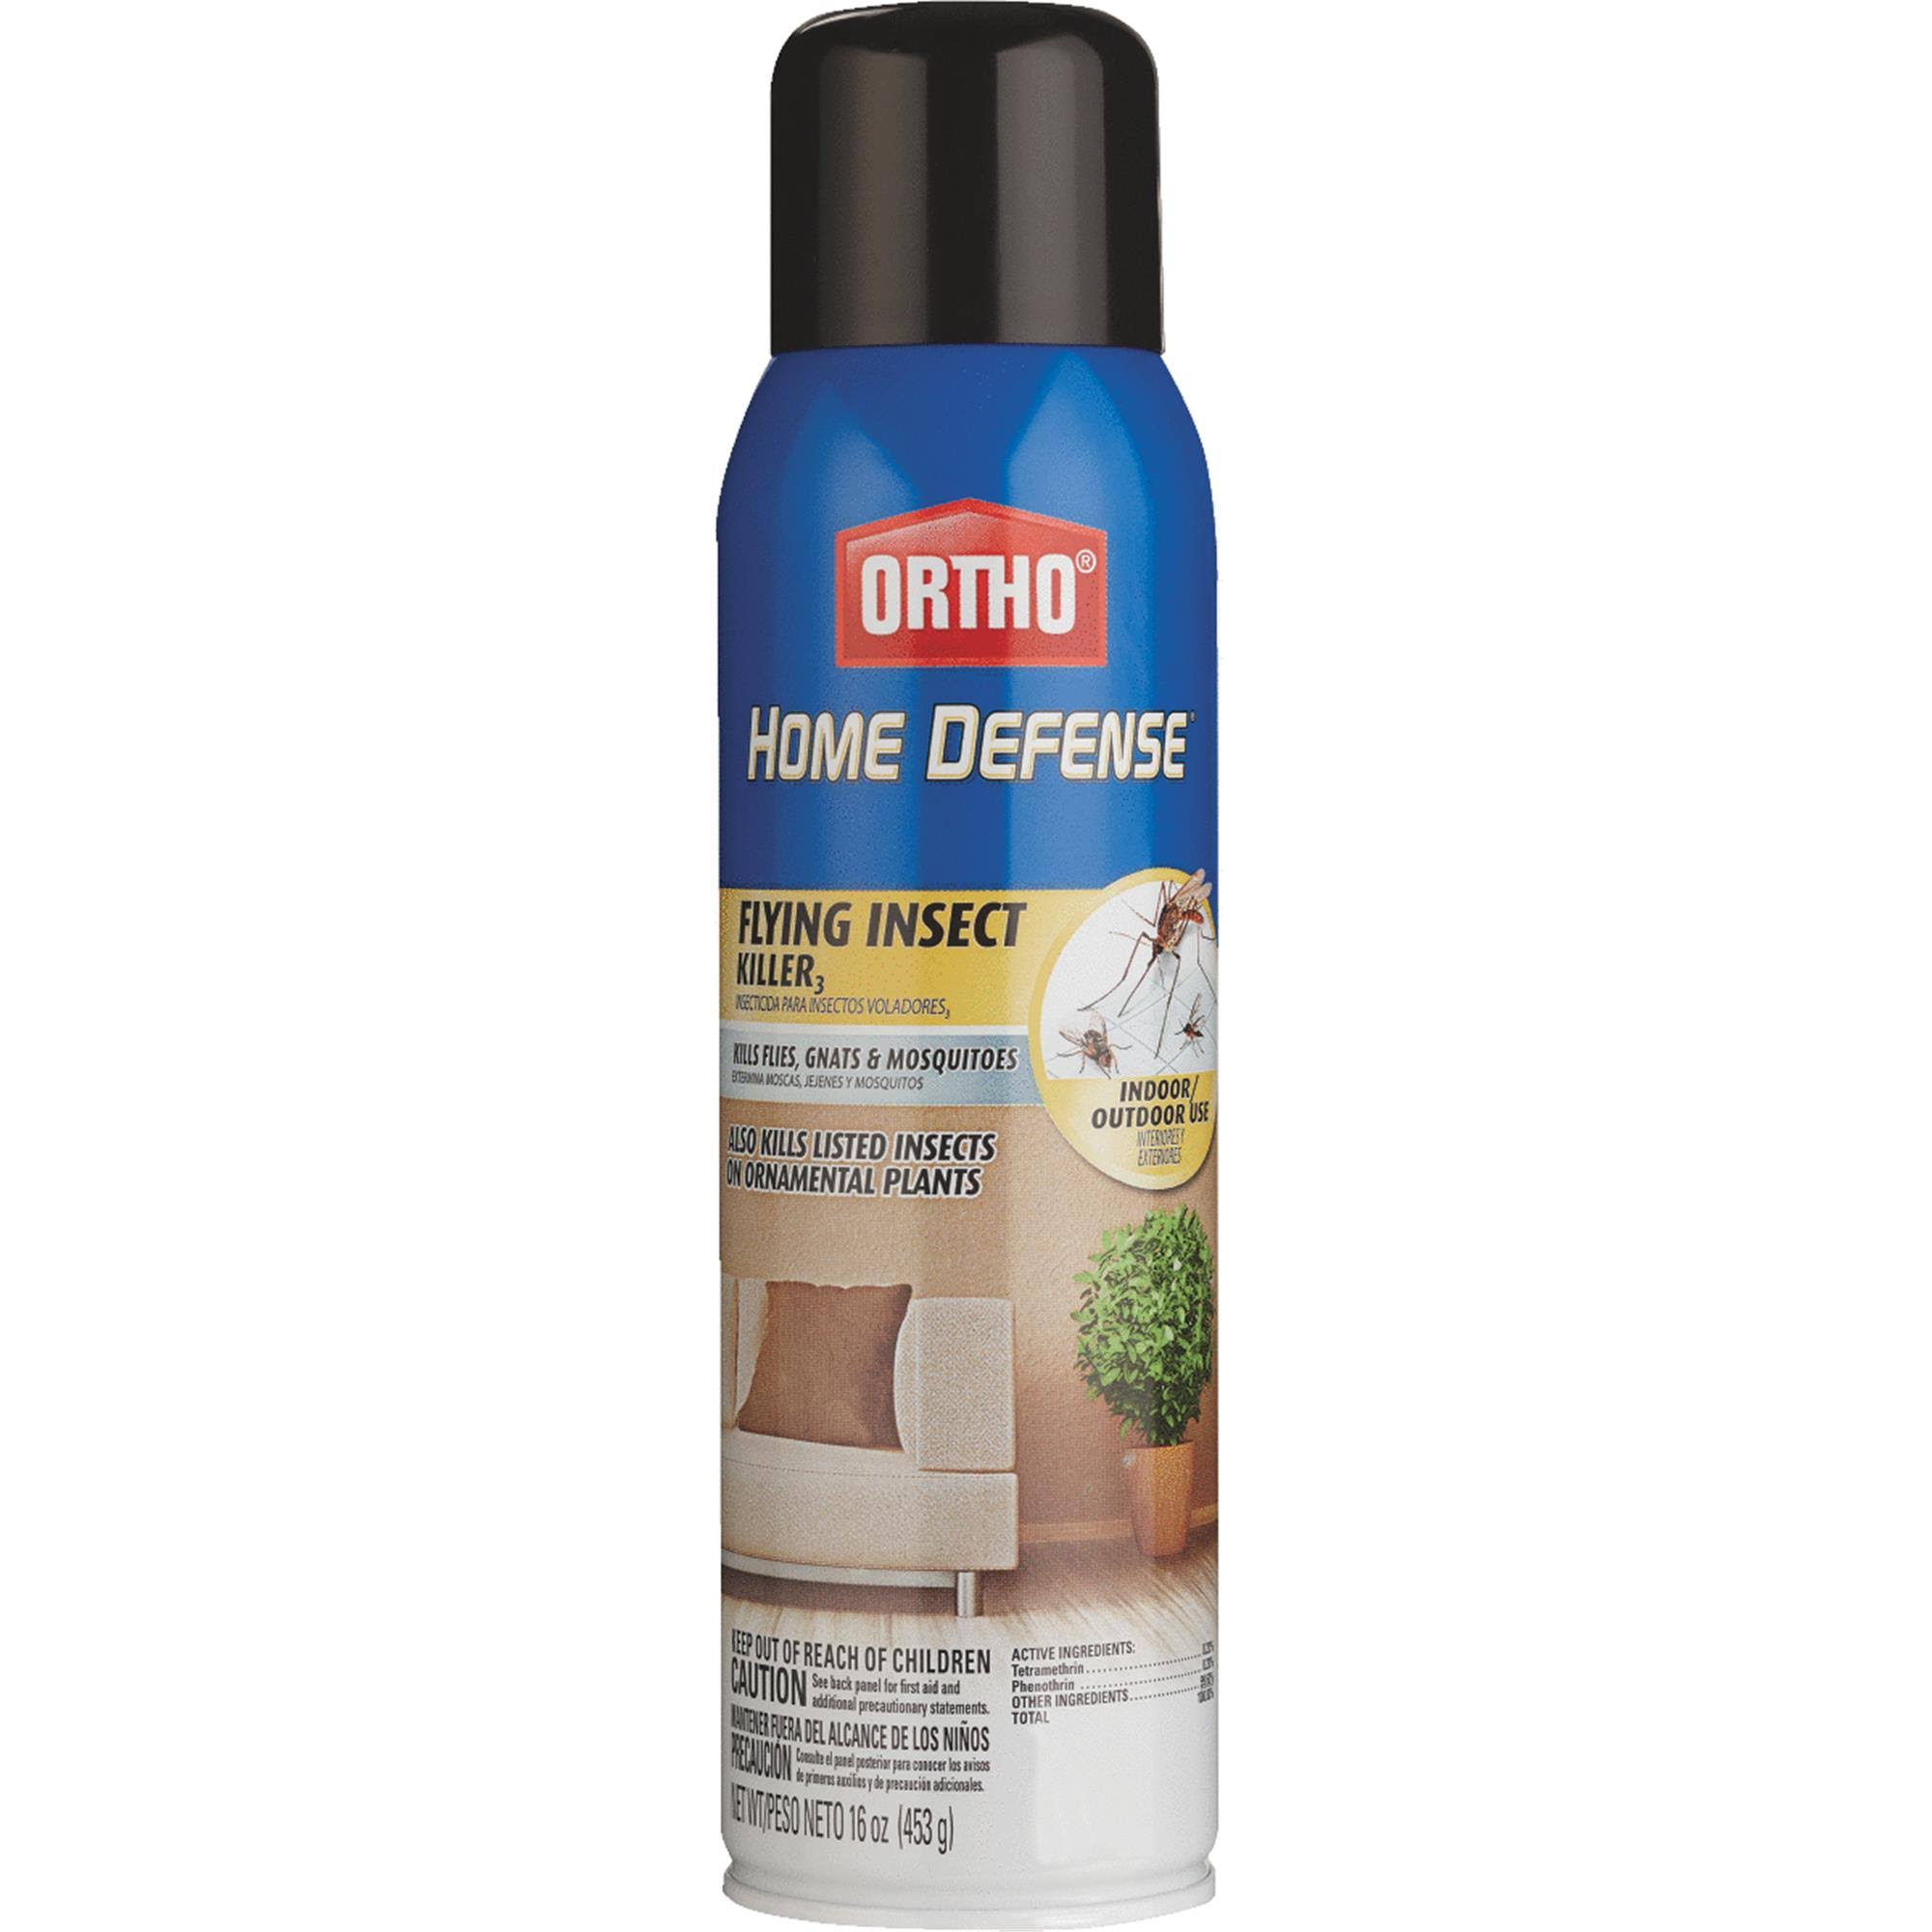 Ortho 0112812 Home Defense Flying Insect Killer, 16 oz